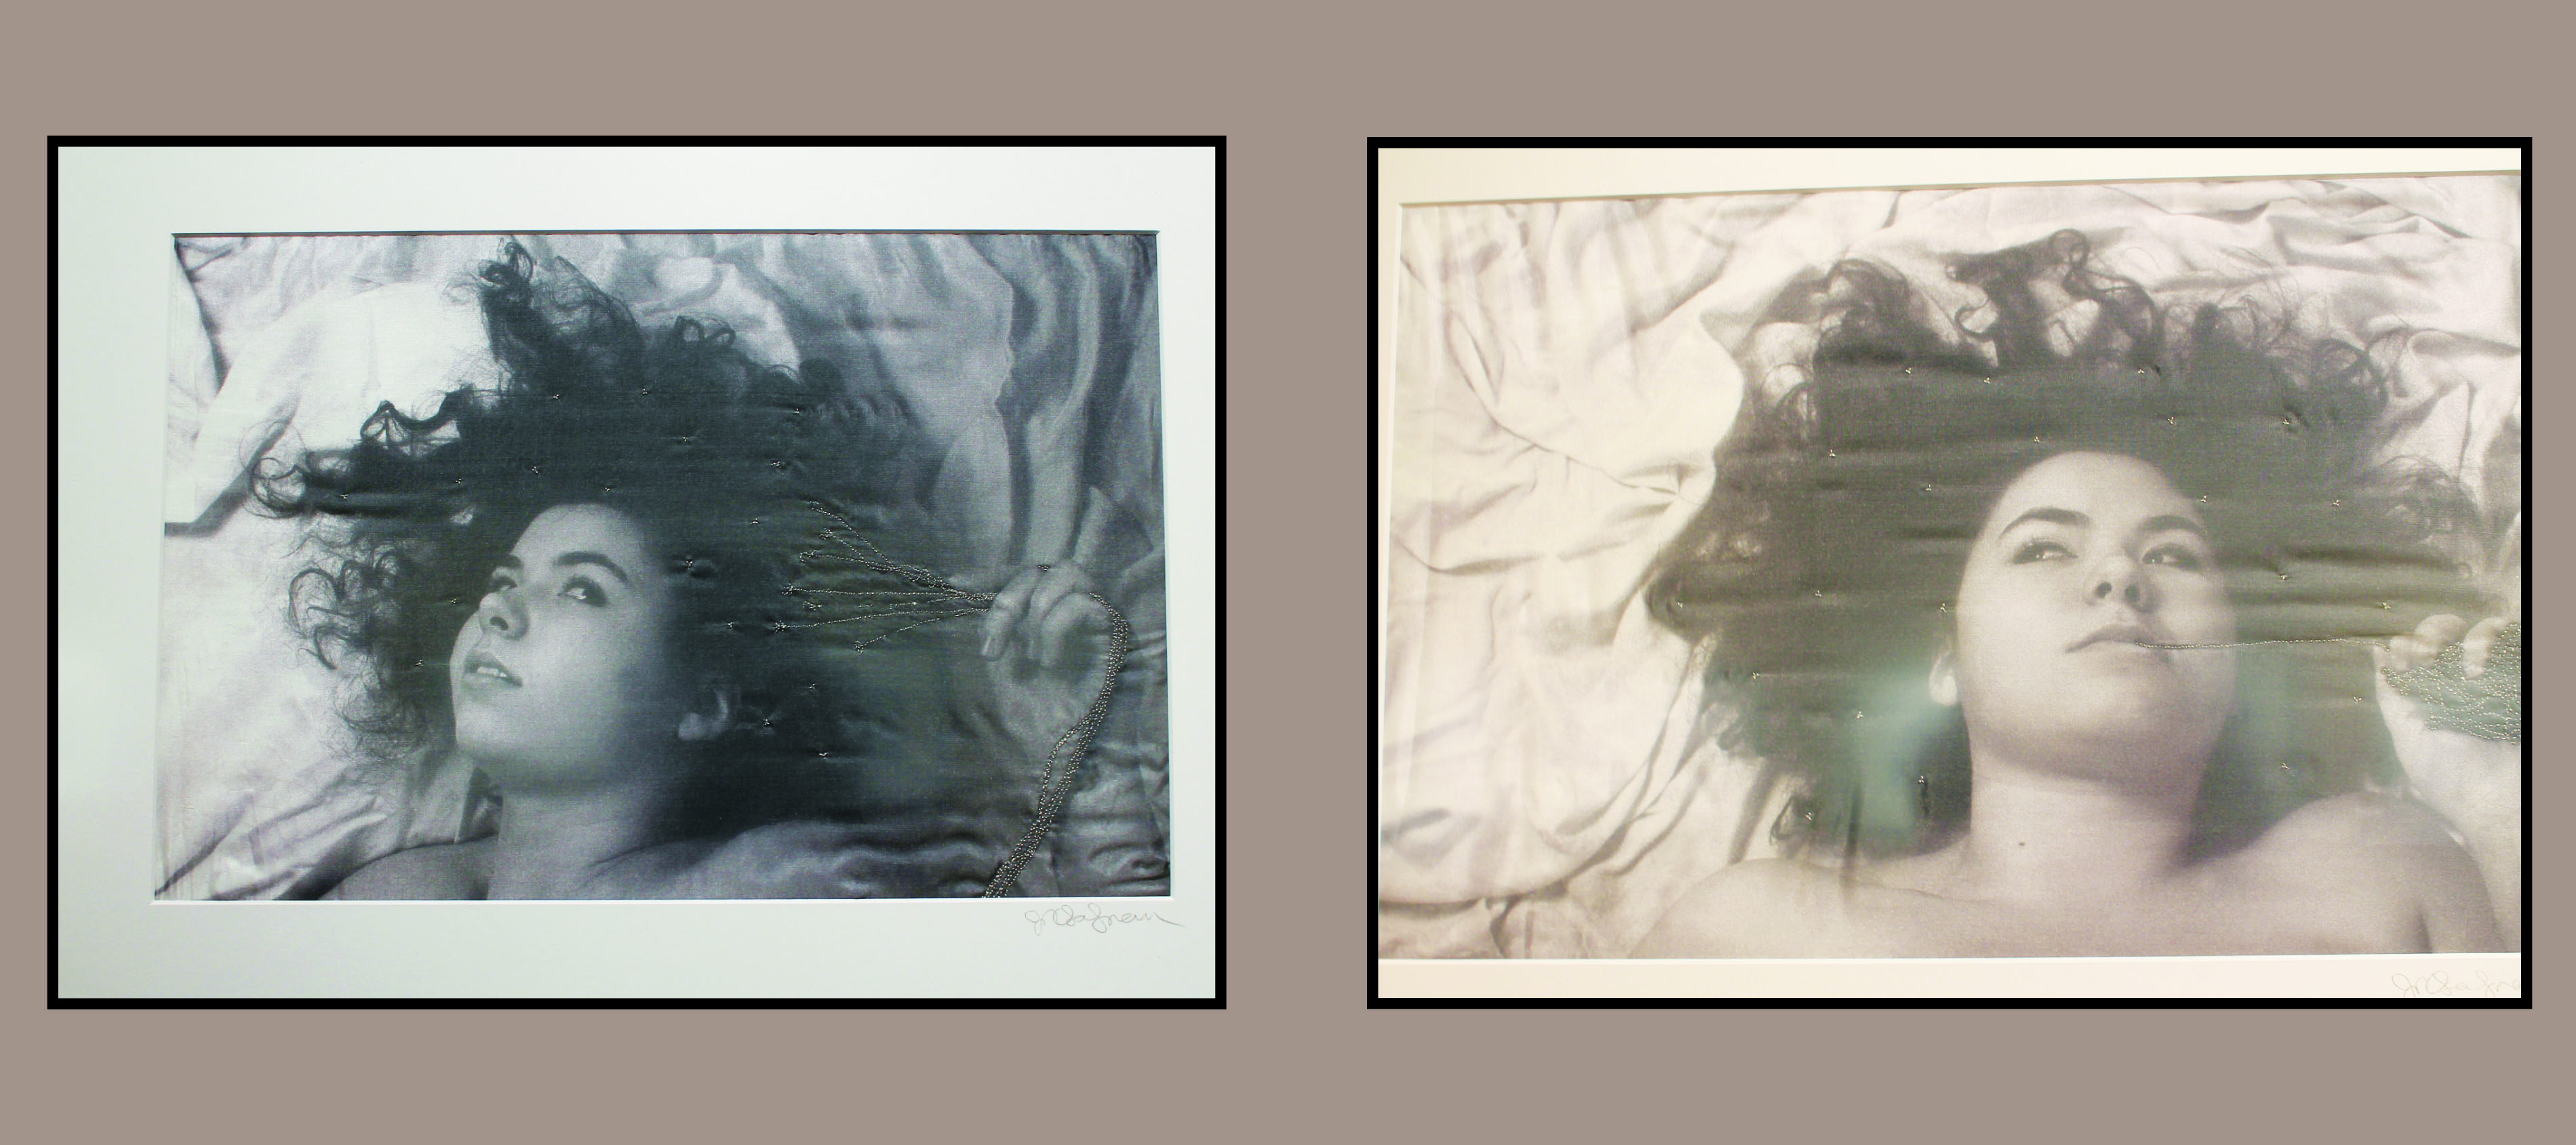 Left: "Collection of Thoughts" by Jennifer Salzman. Right: "Contemplation" by Jennifer Salzman.